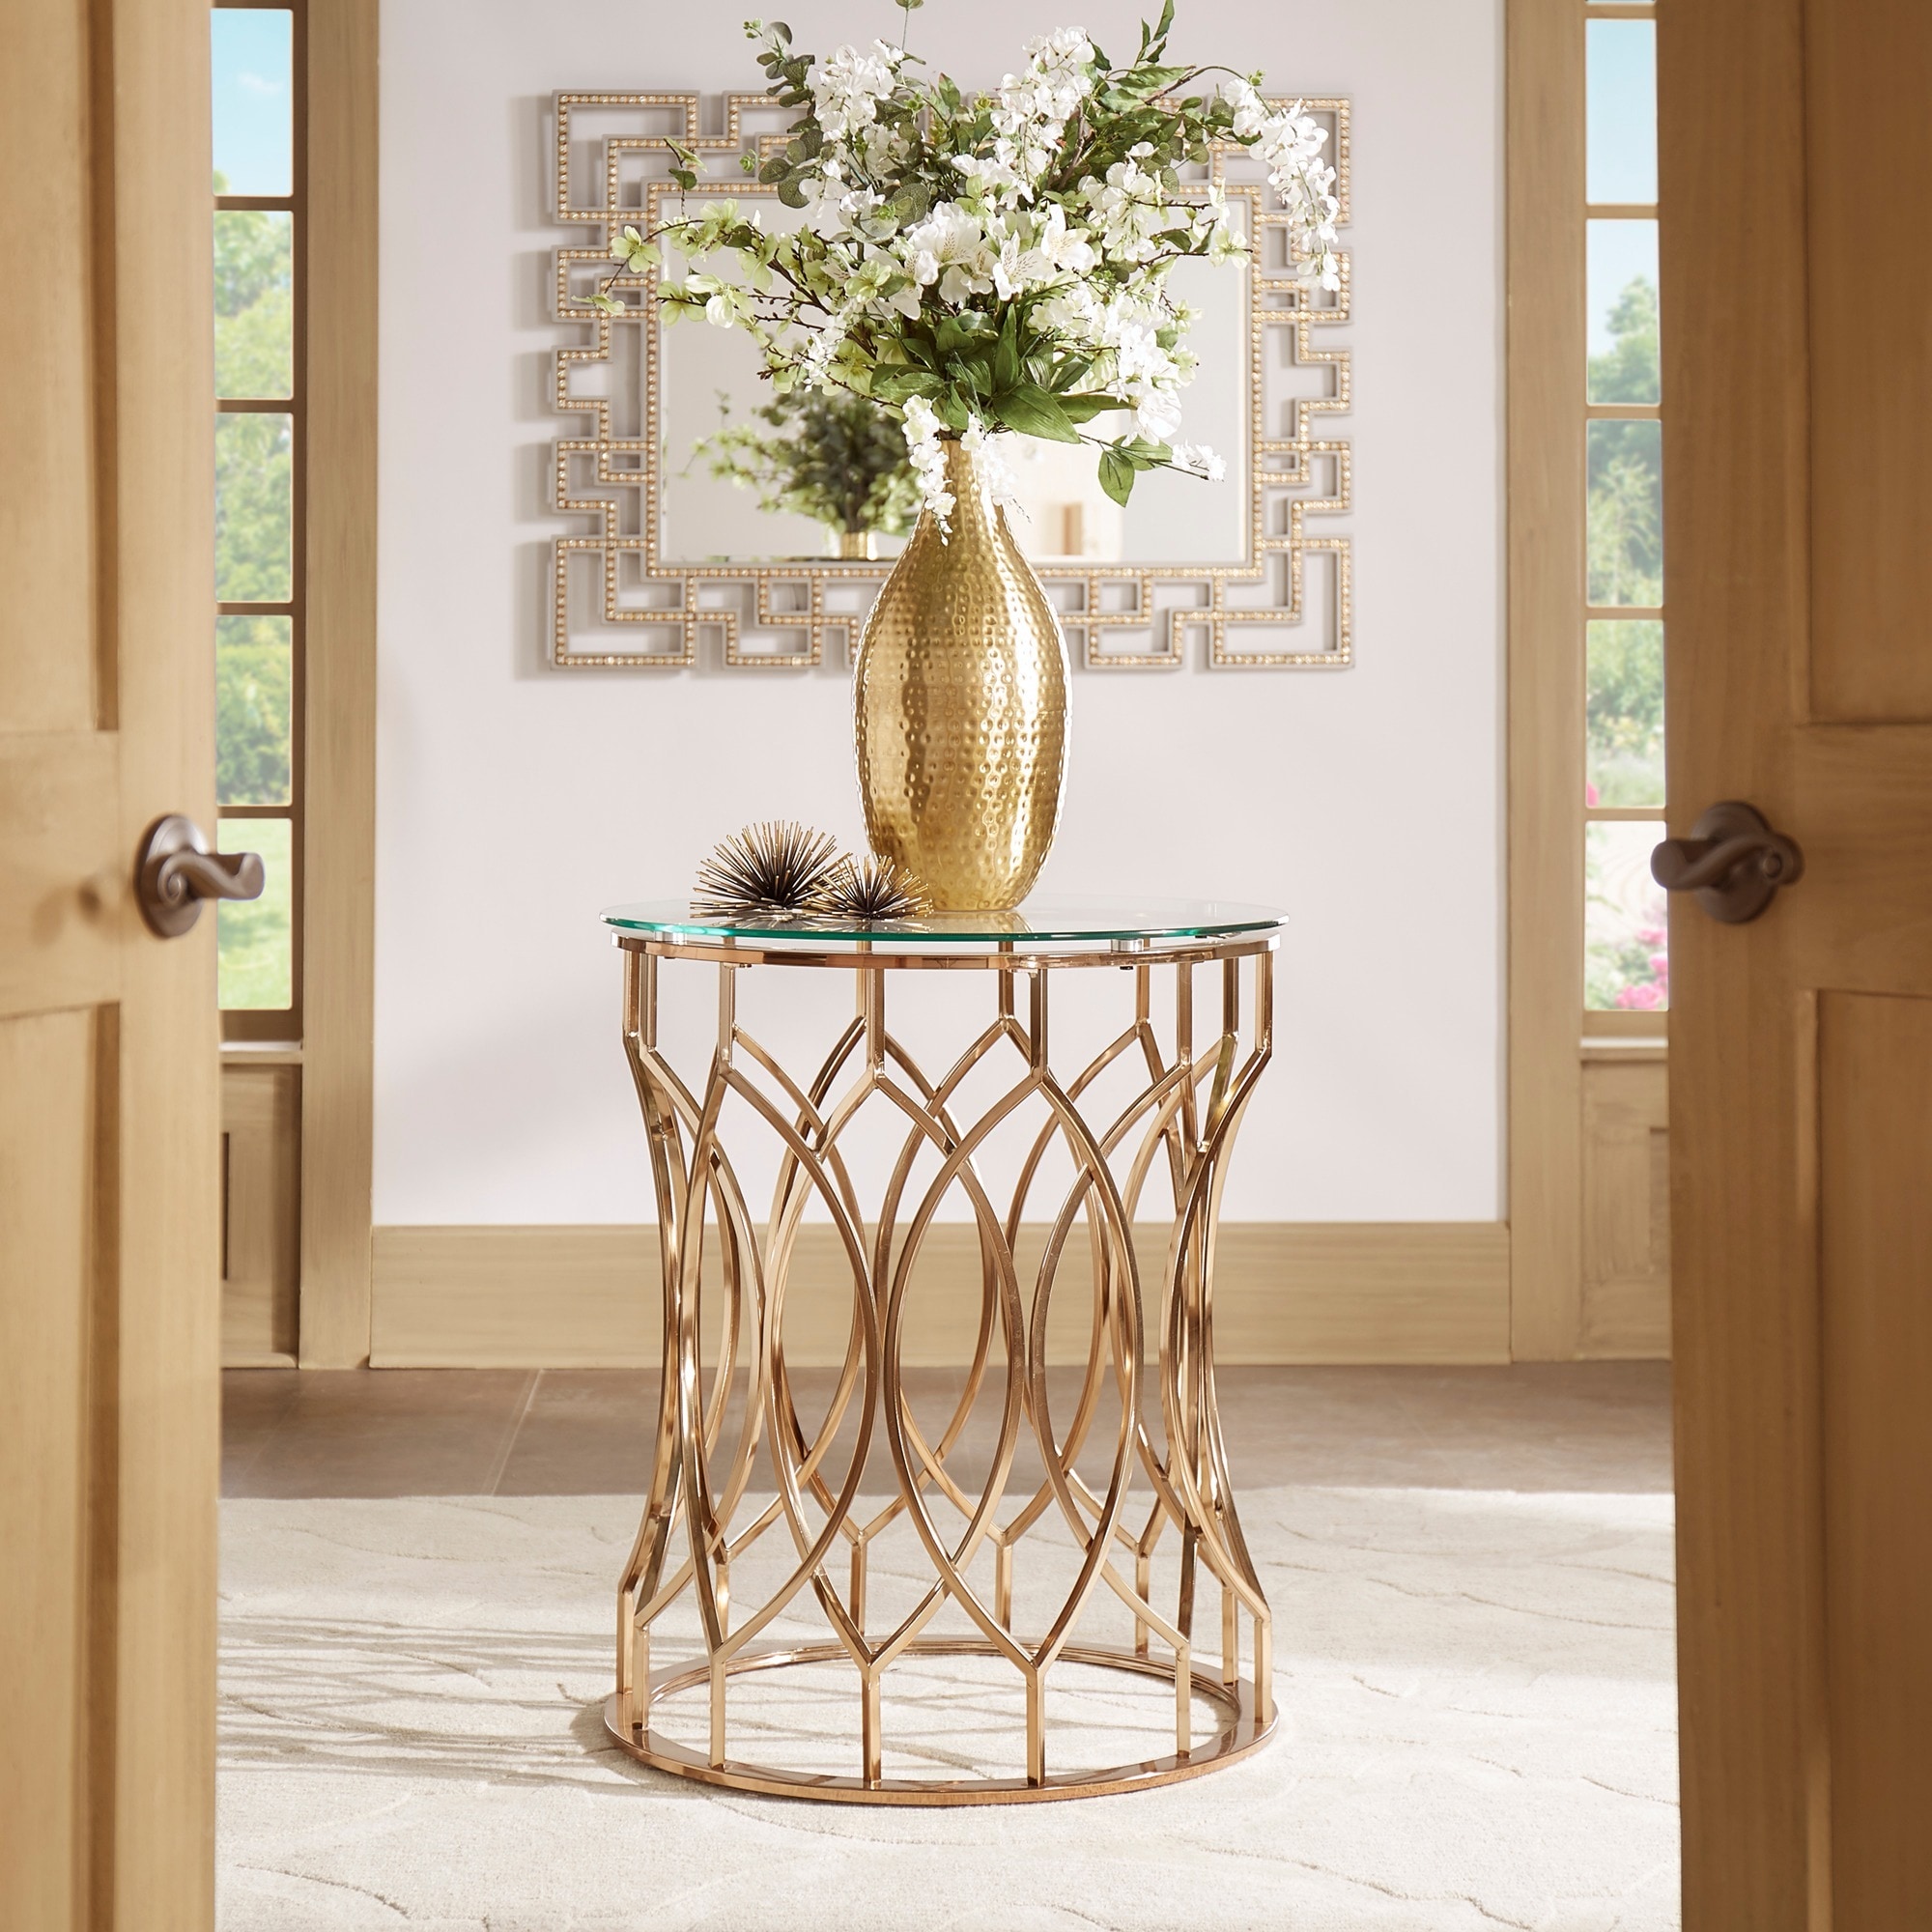 Shop Davlin Modern Glam Round Glass Top Metal Foyer Table By